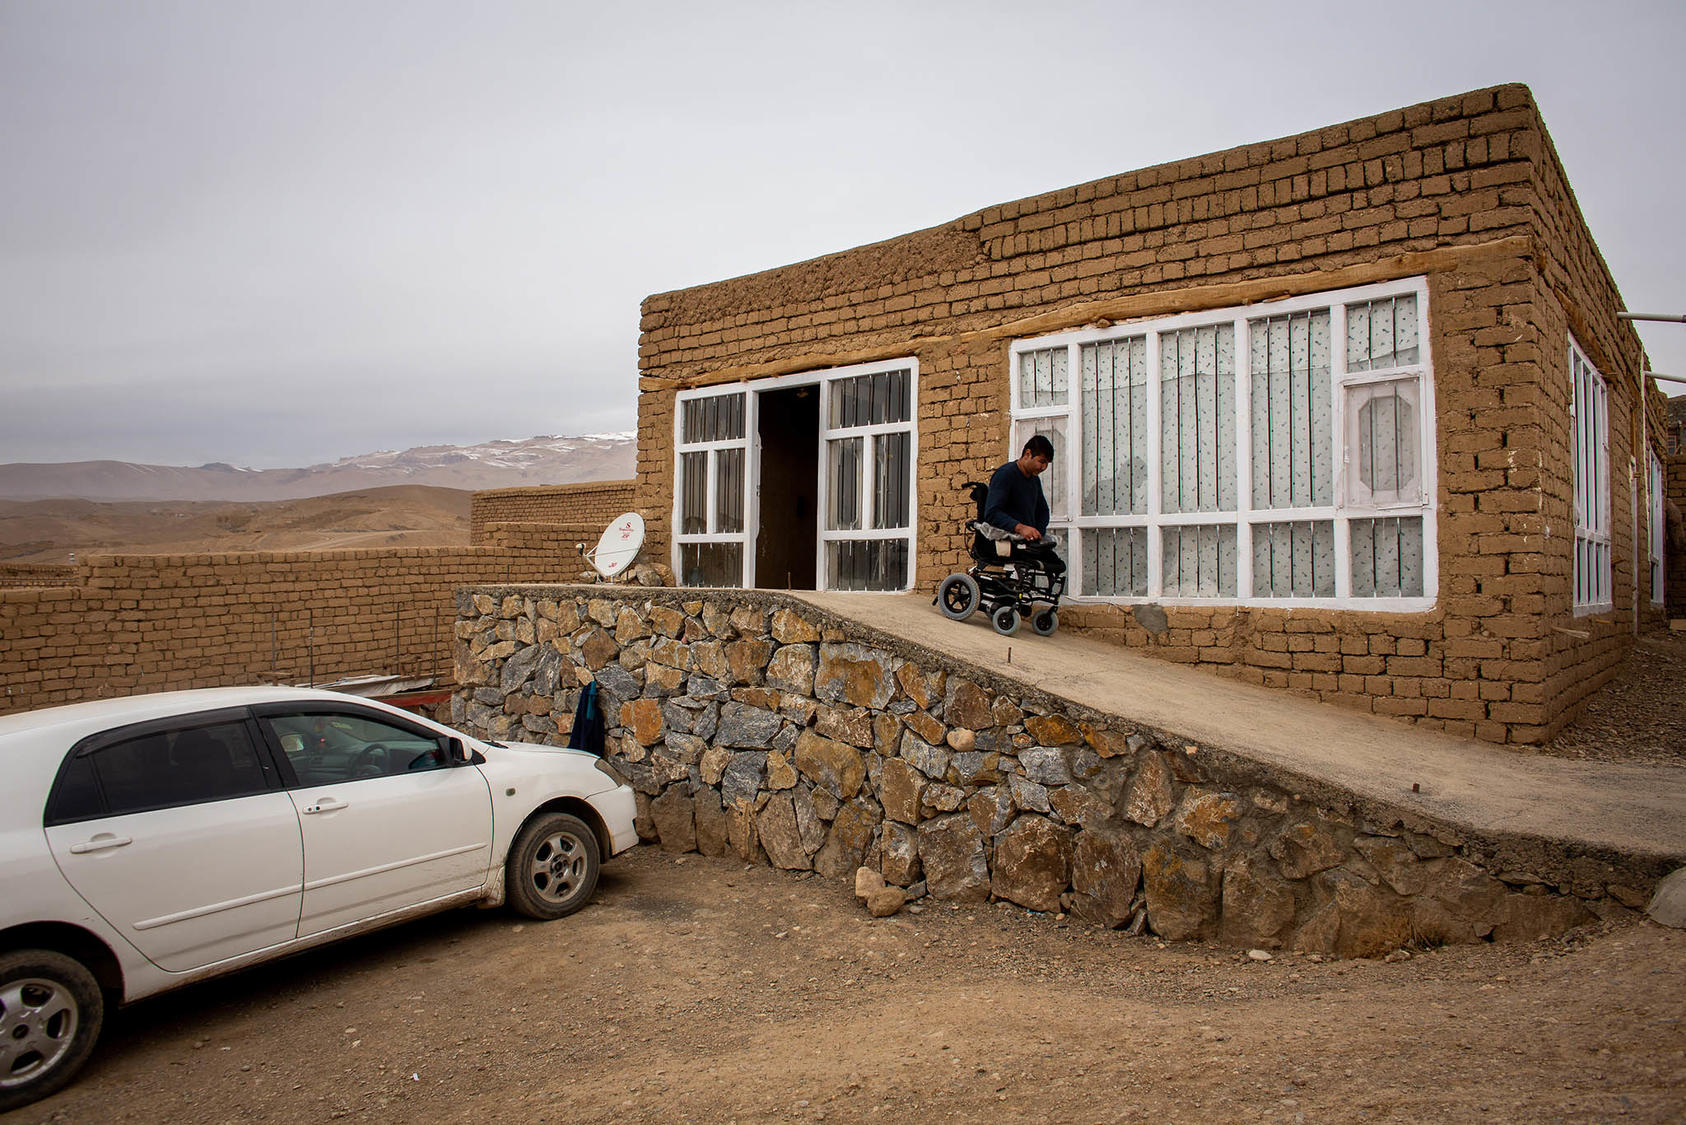 Mirza Hussain Haidari, who lost his legs fighting for the Afghan army, at his home in Bamian, Afghanistan, Nov. 19, 2019. (Jim Huylebroek/The New York Times)